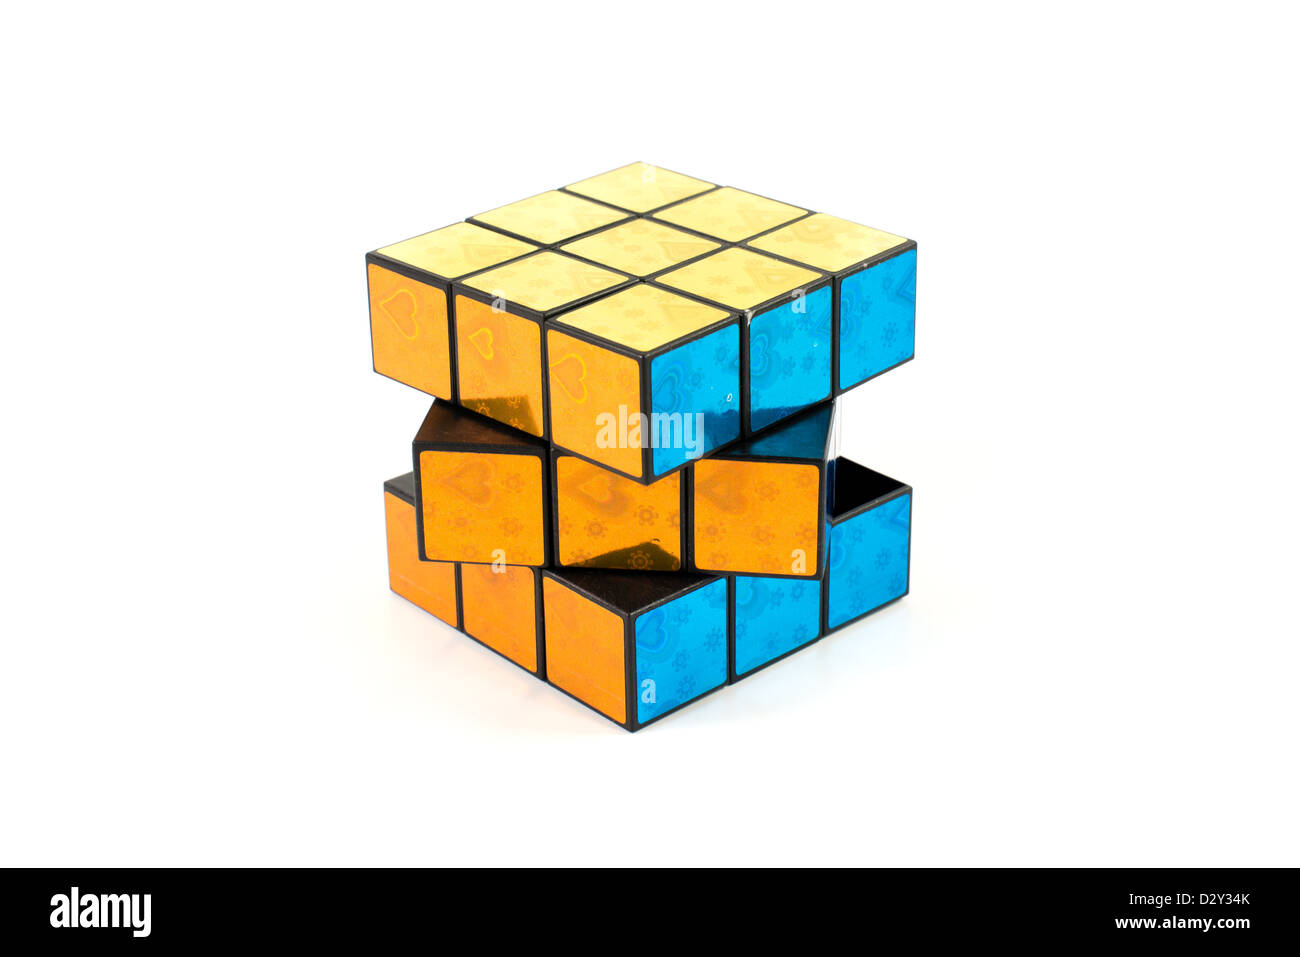 A knockoff Rubick's cube with yellow, gold, and blue sides. Stock Photo